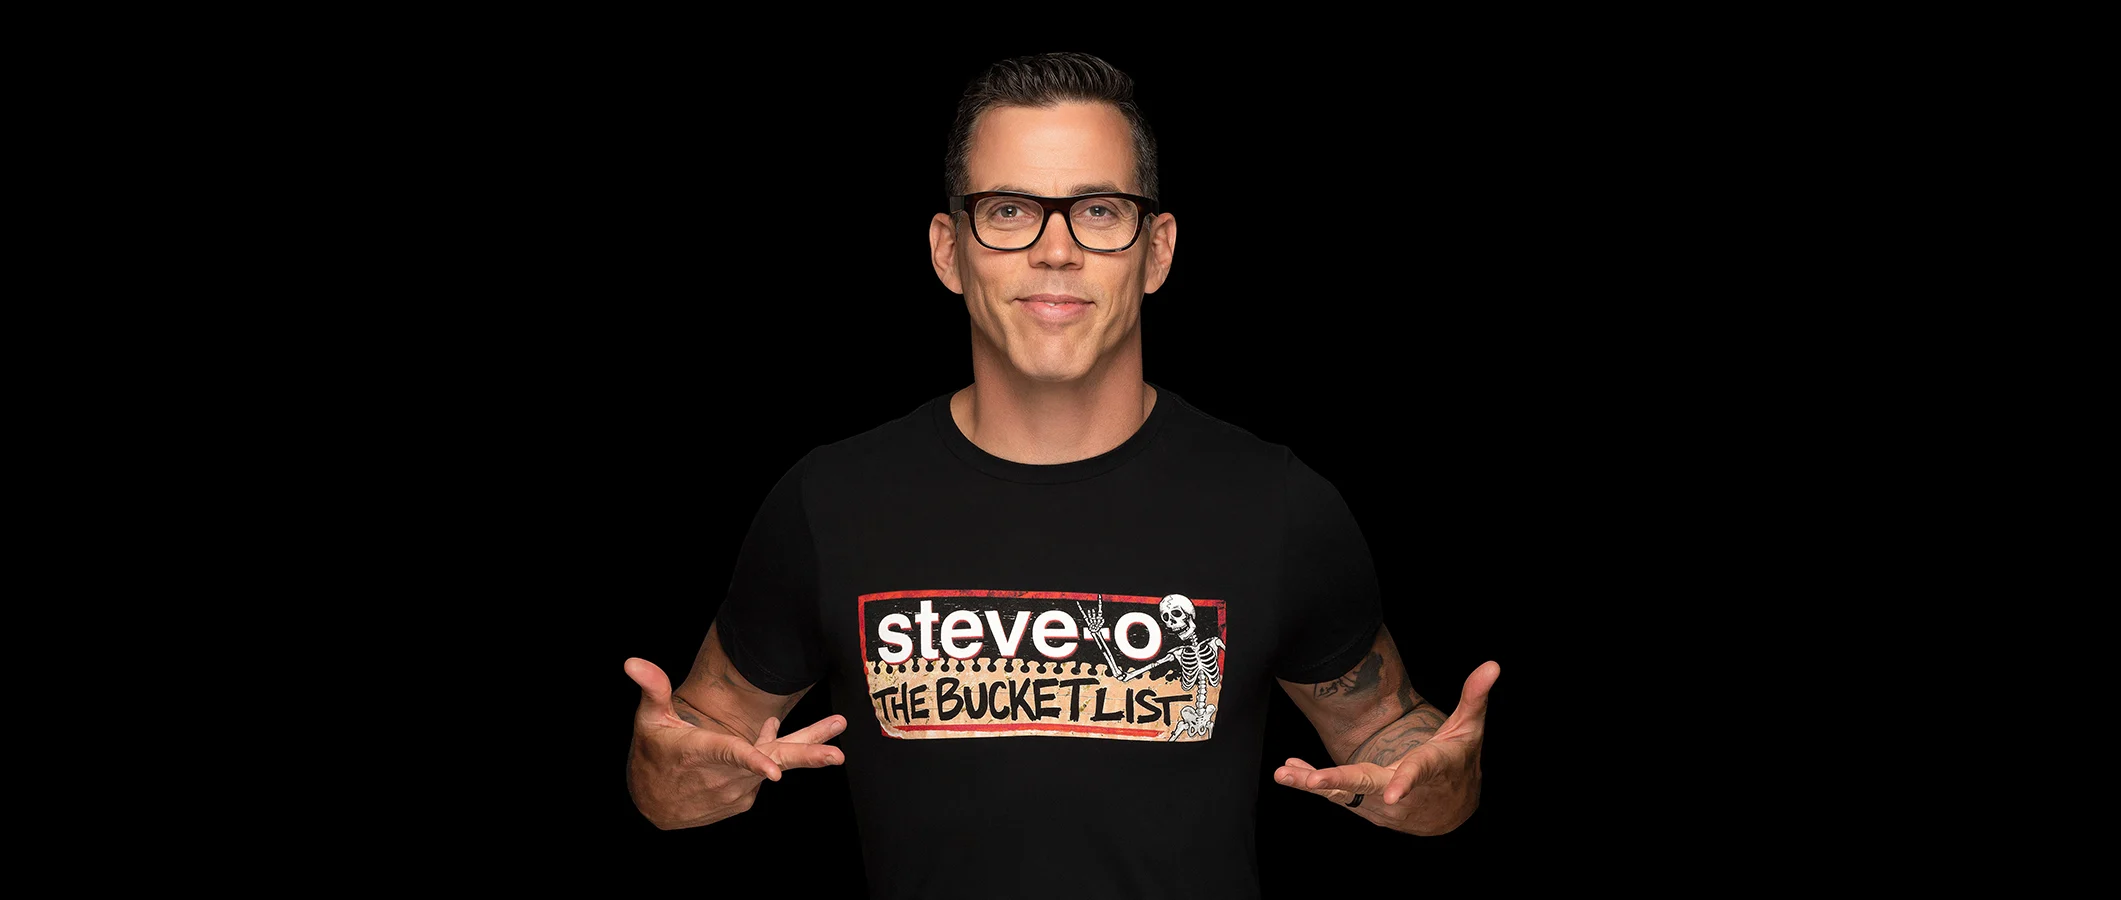 Podcast 106: Steve-O on Becoming a Stuntman, Finding Recovery &#038; Sense of Purpose